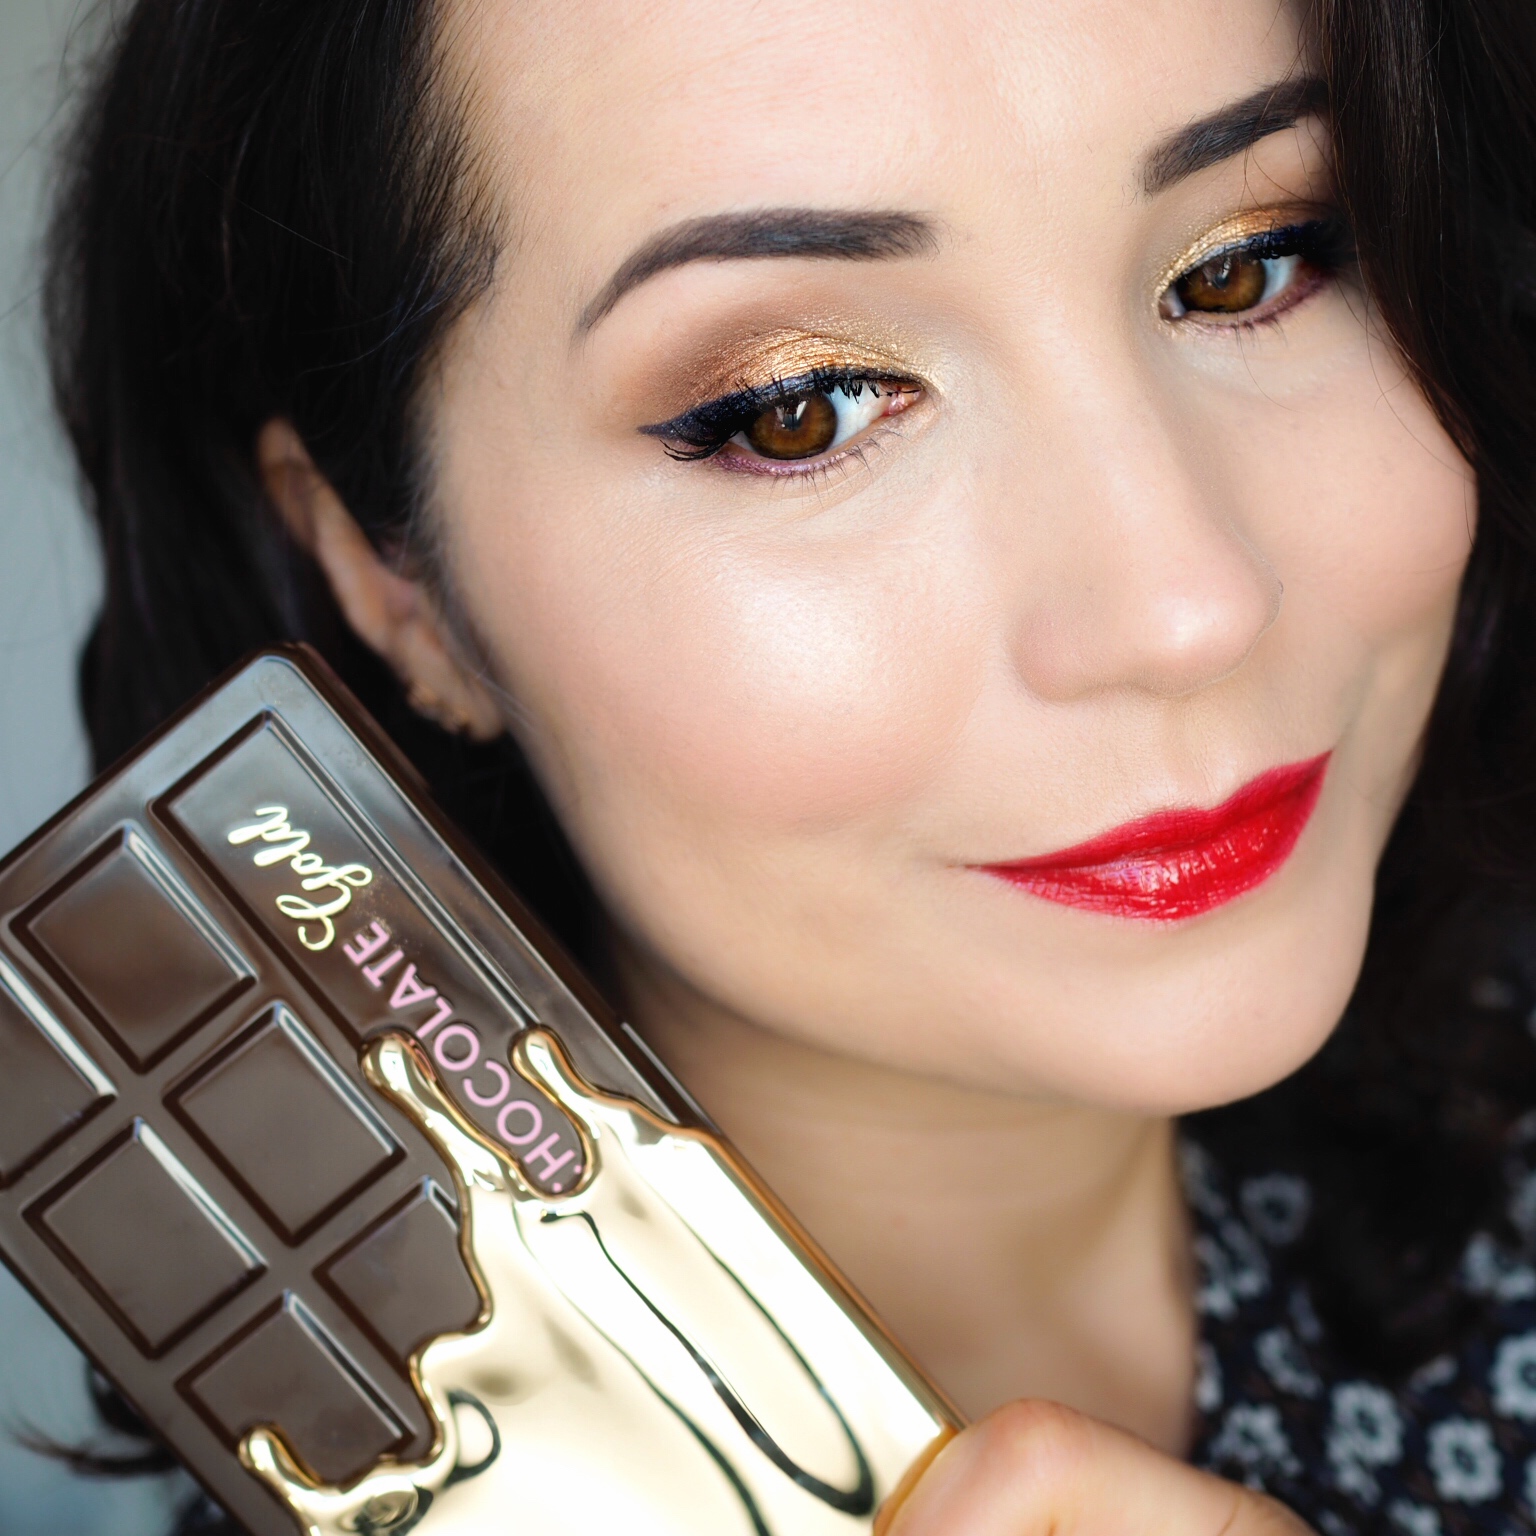 TOO FACED CHOCOLATE GOLD